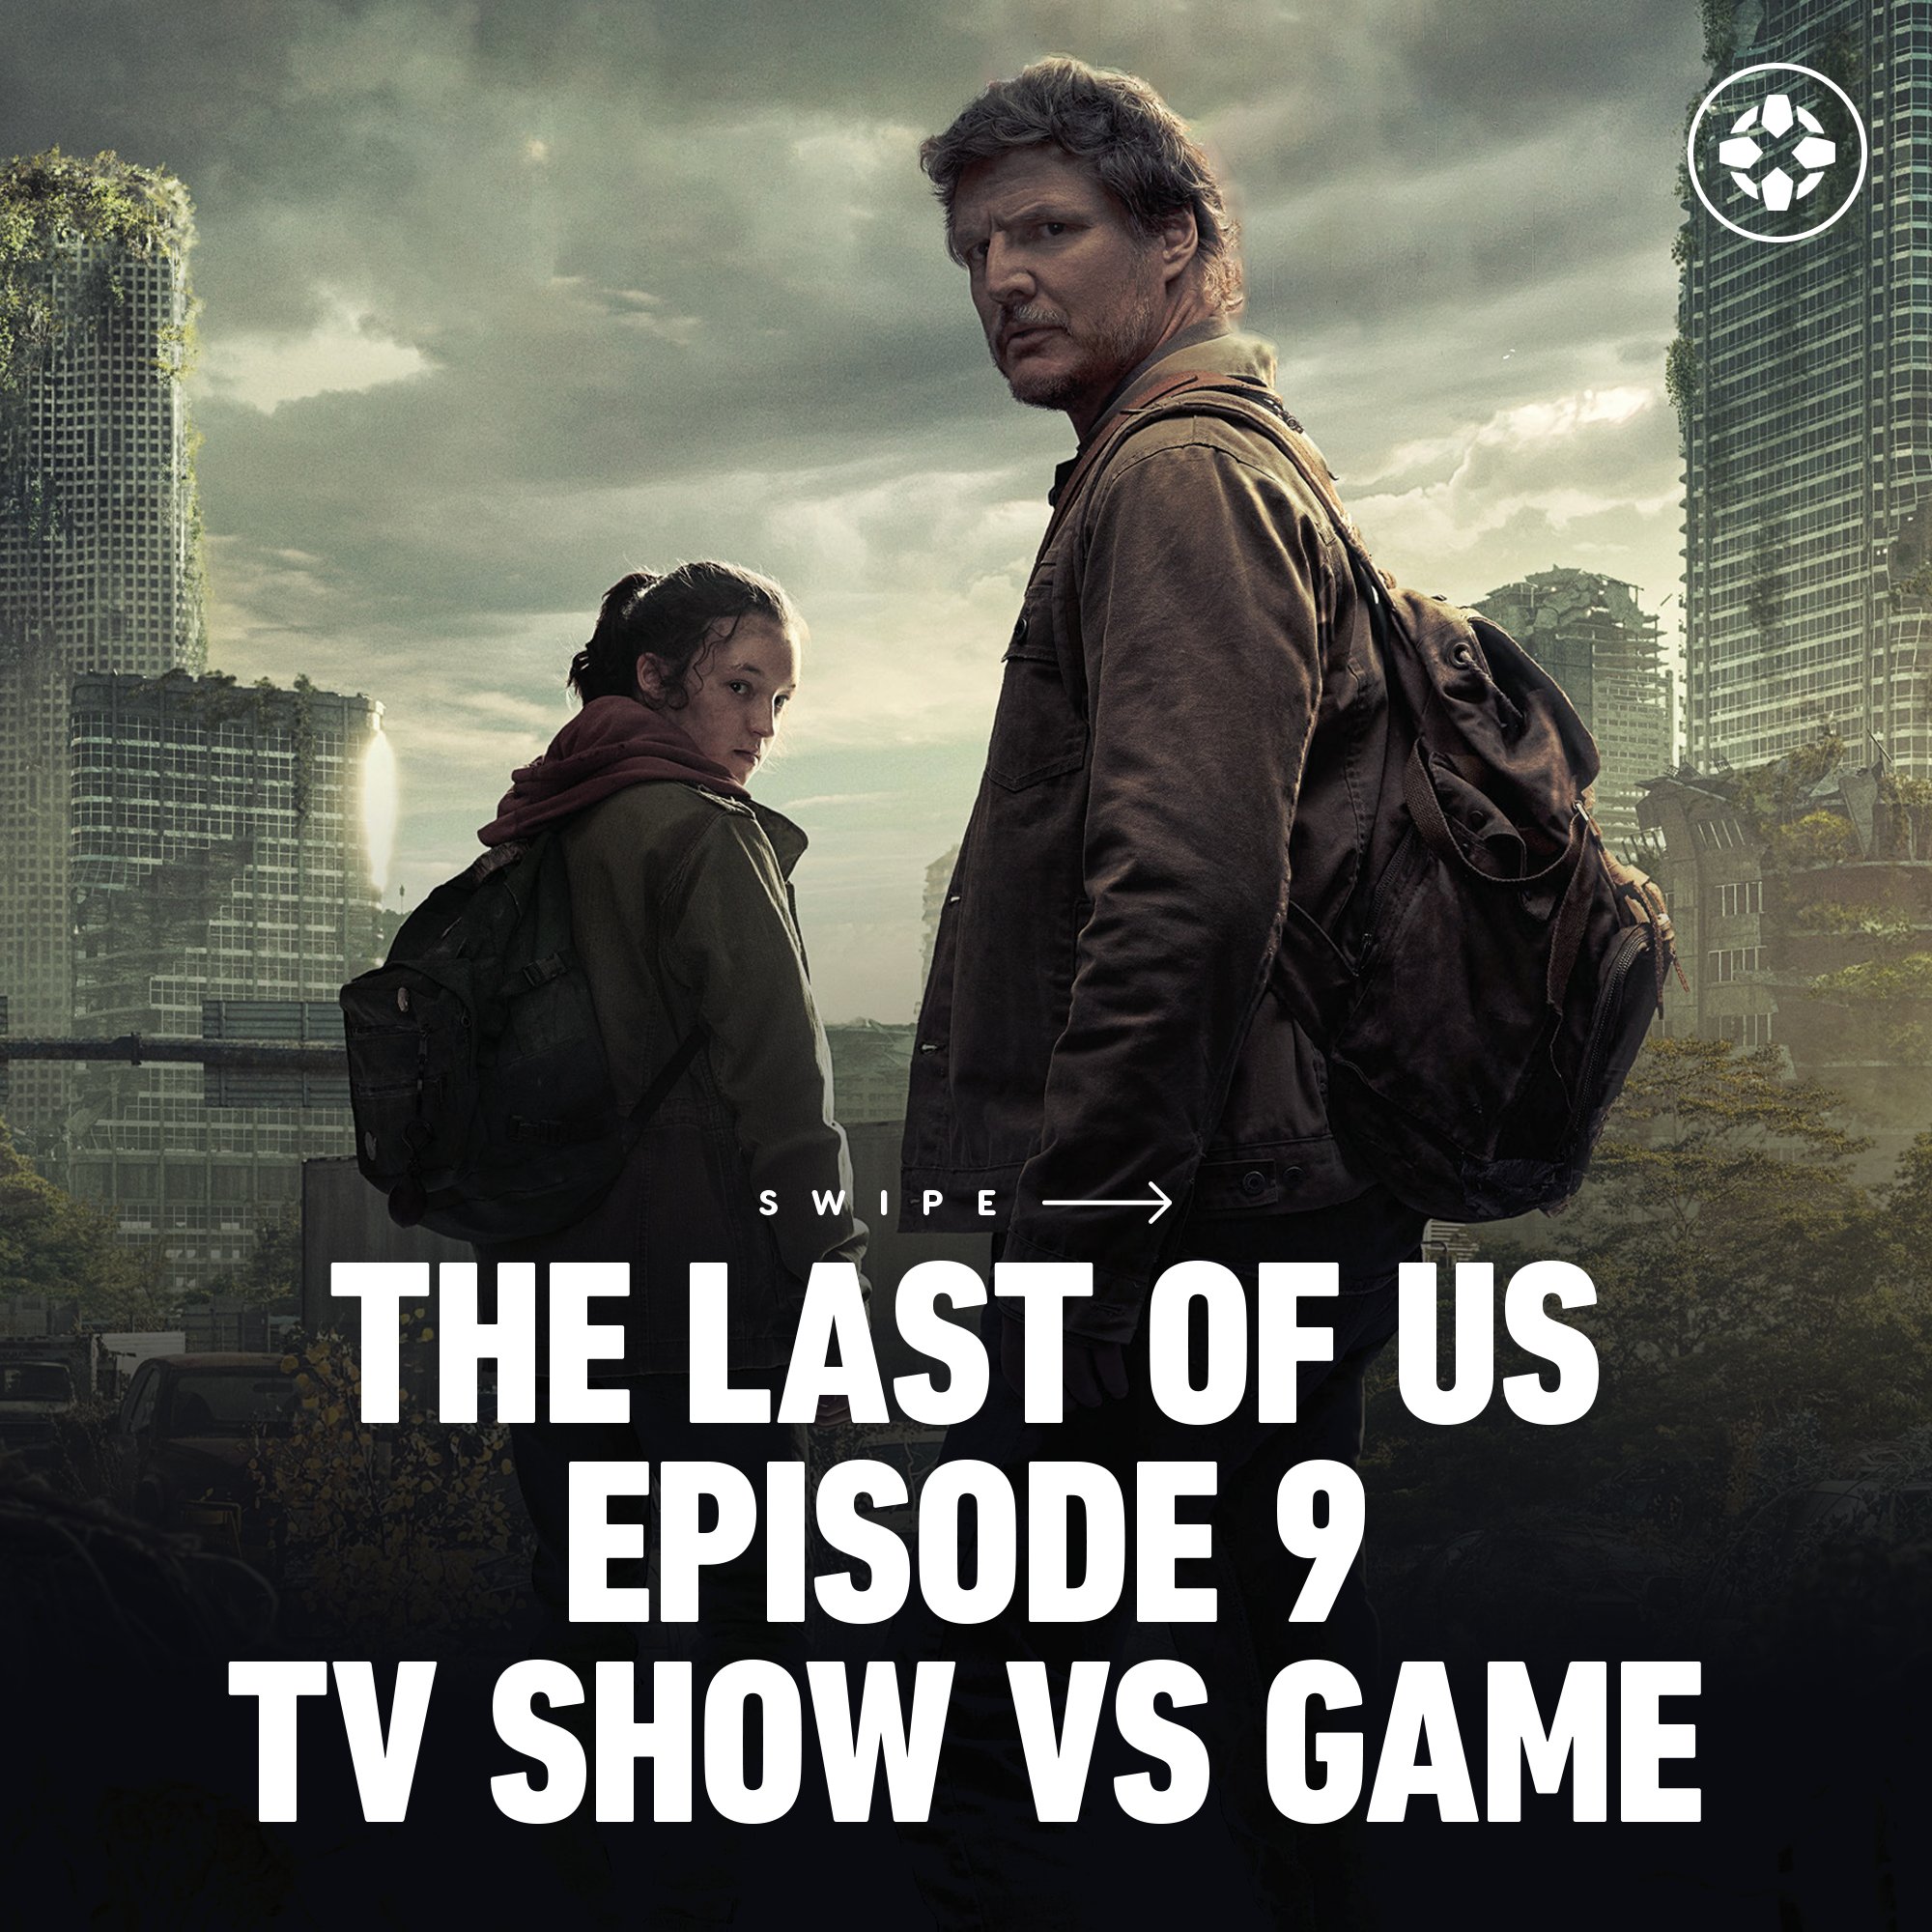 The Last of Us release schedule: When is episode 9 released?